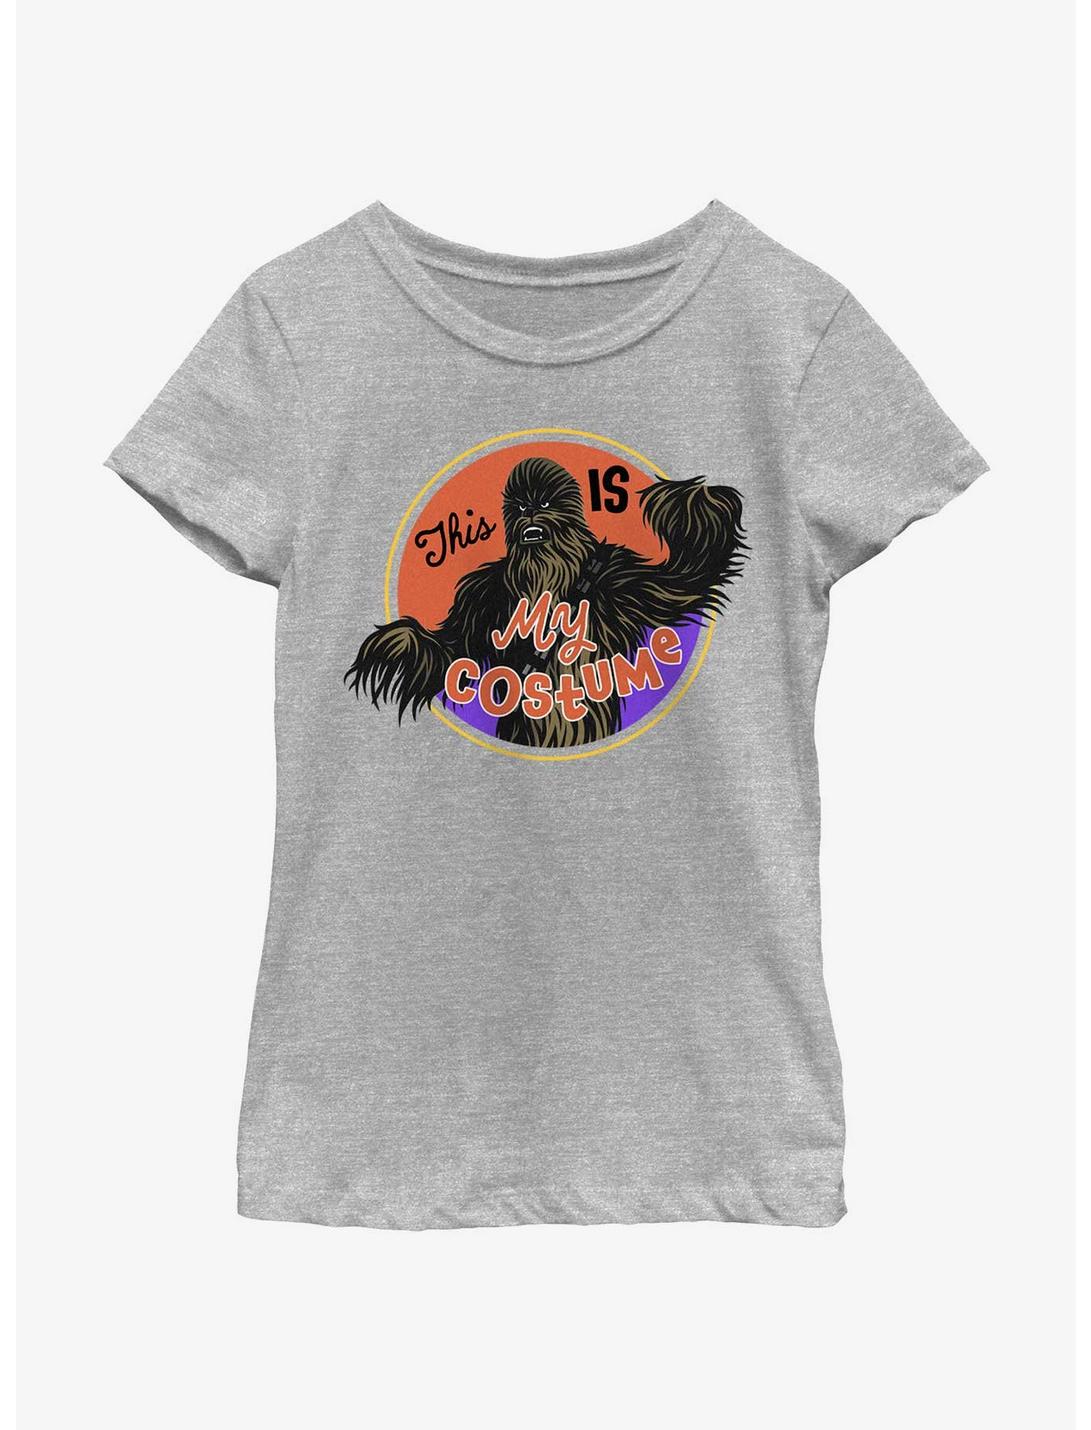 Star Wars My Wookie Costume Youth Girls T-Shirt, ATH HTR, hi-res